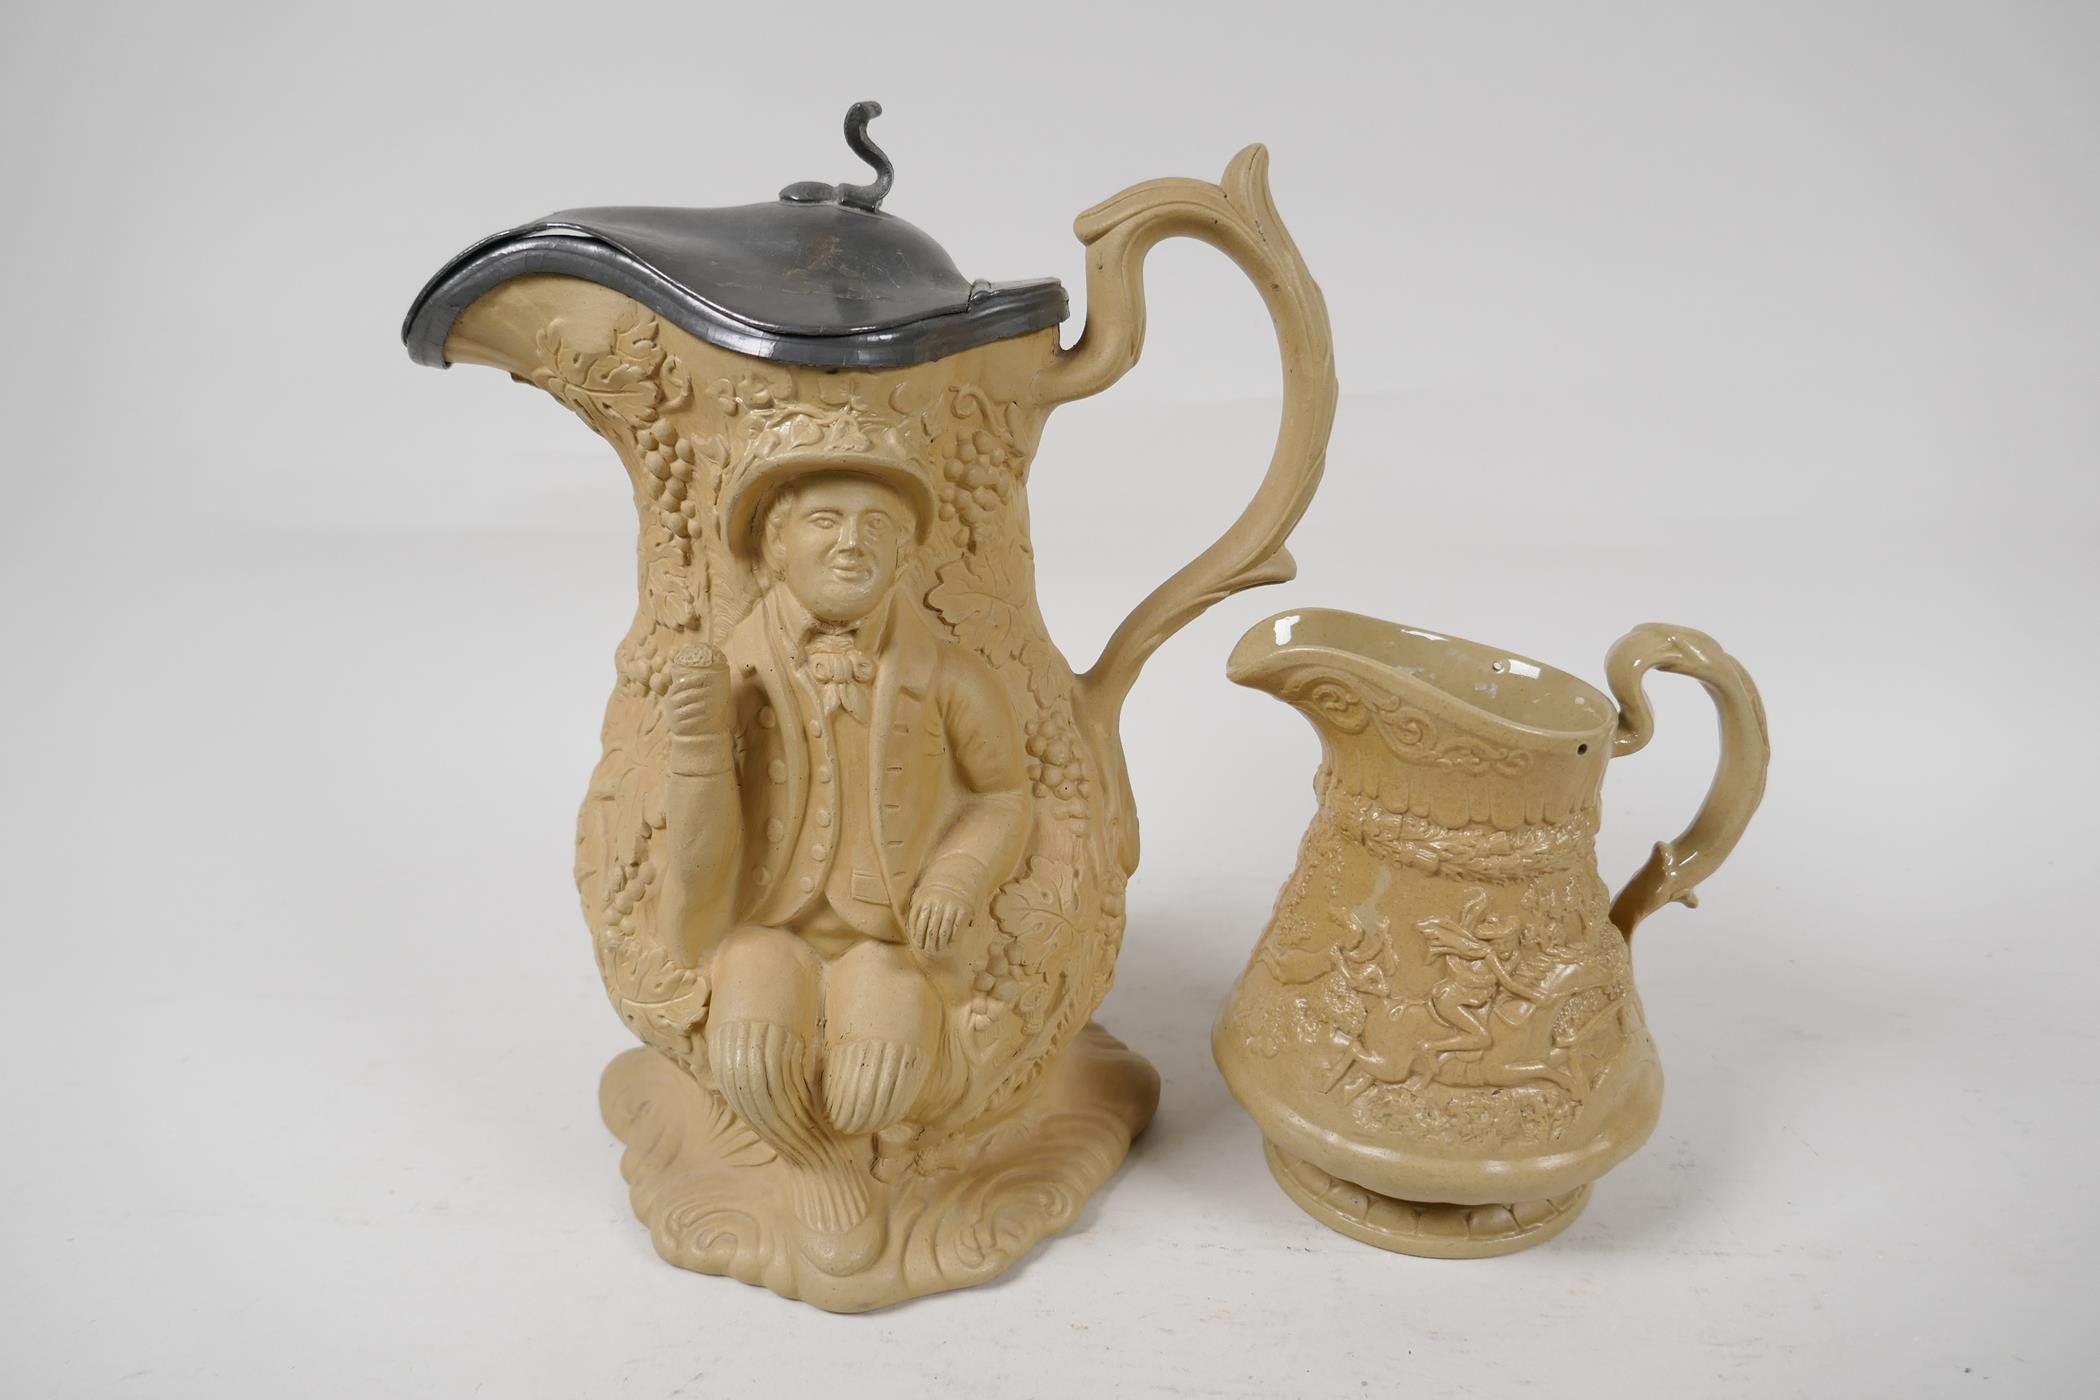 A C19th stoneware jug moulded with figures and fruiting vines, with sandstone matt glaze and - Image 2 of 6